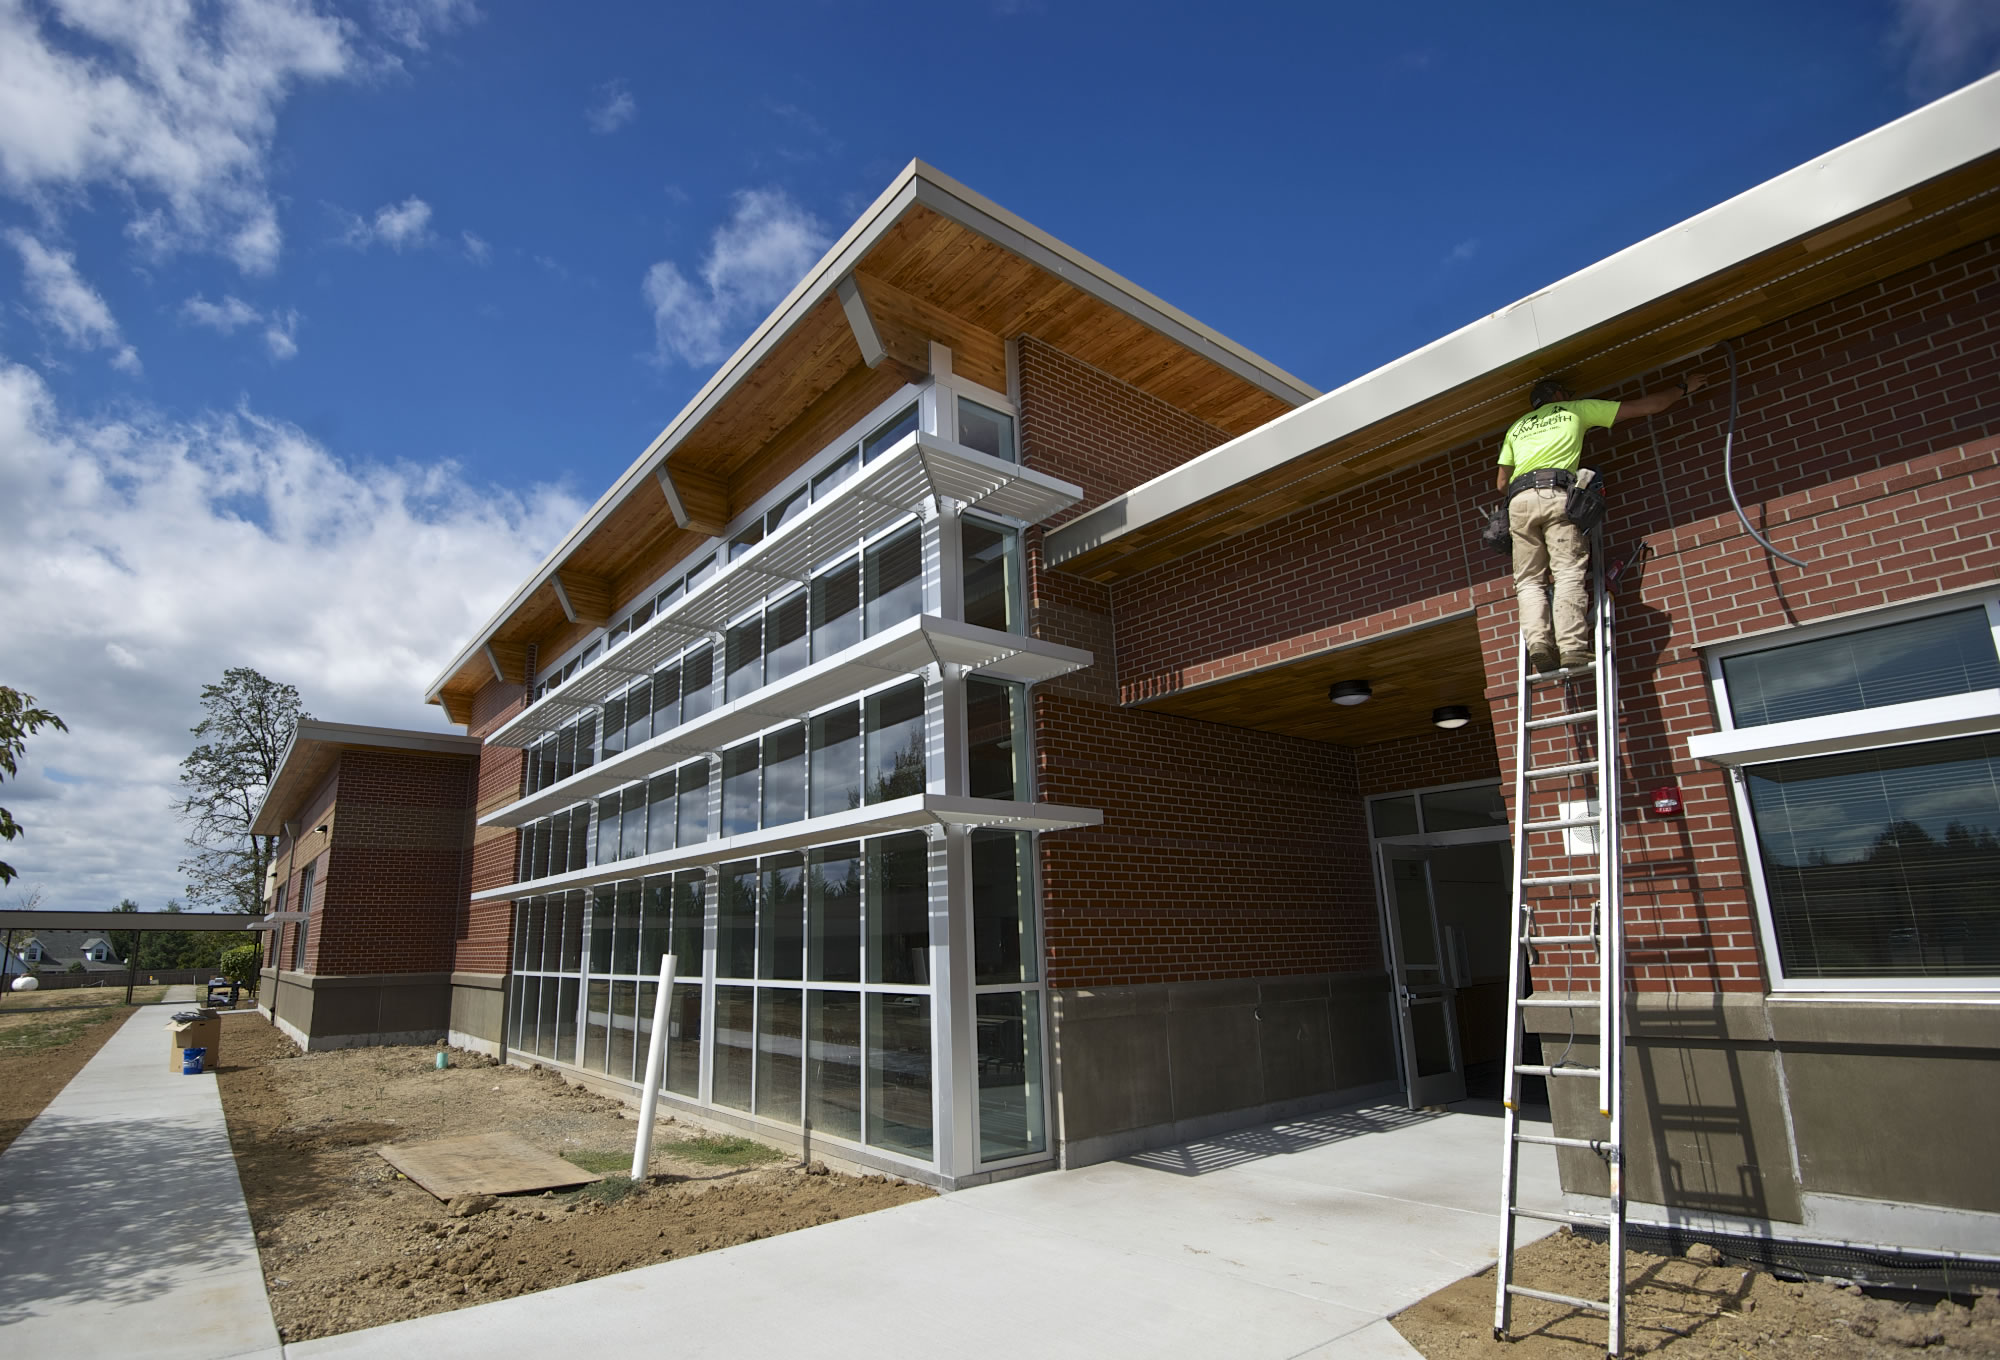 Workers scramble to finish a new building at Ridgefield High School the day before the start of classes in September 2014. A bond issue likely to go before voters in February 2019 would most likely be used to build a new K-4 school and for additional expansions at Ridgefield High School, Superintendent Nathan McCann said.